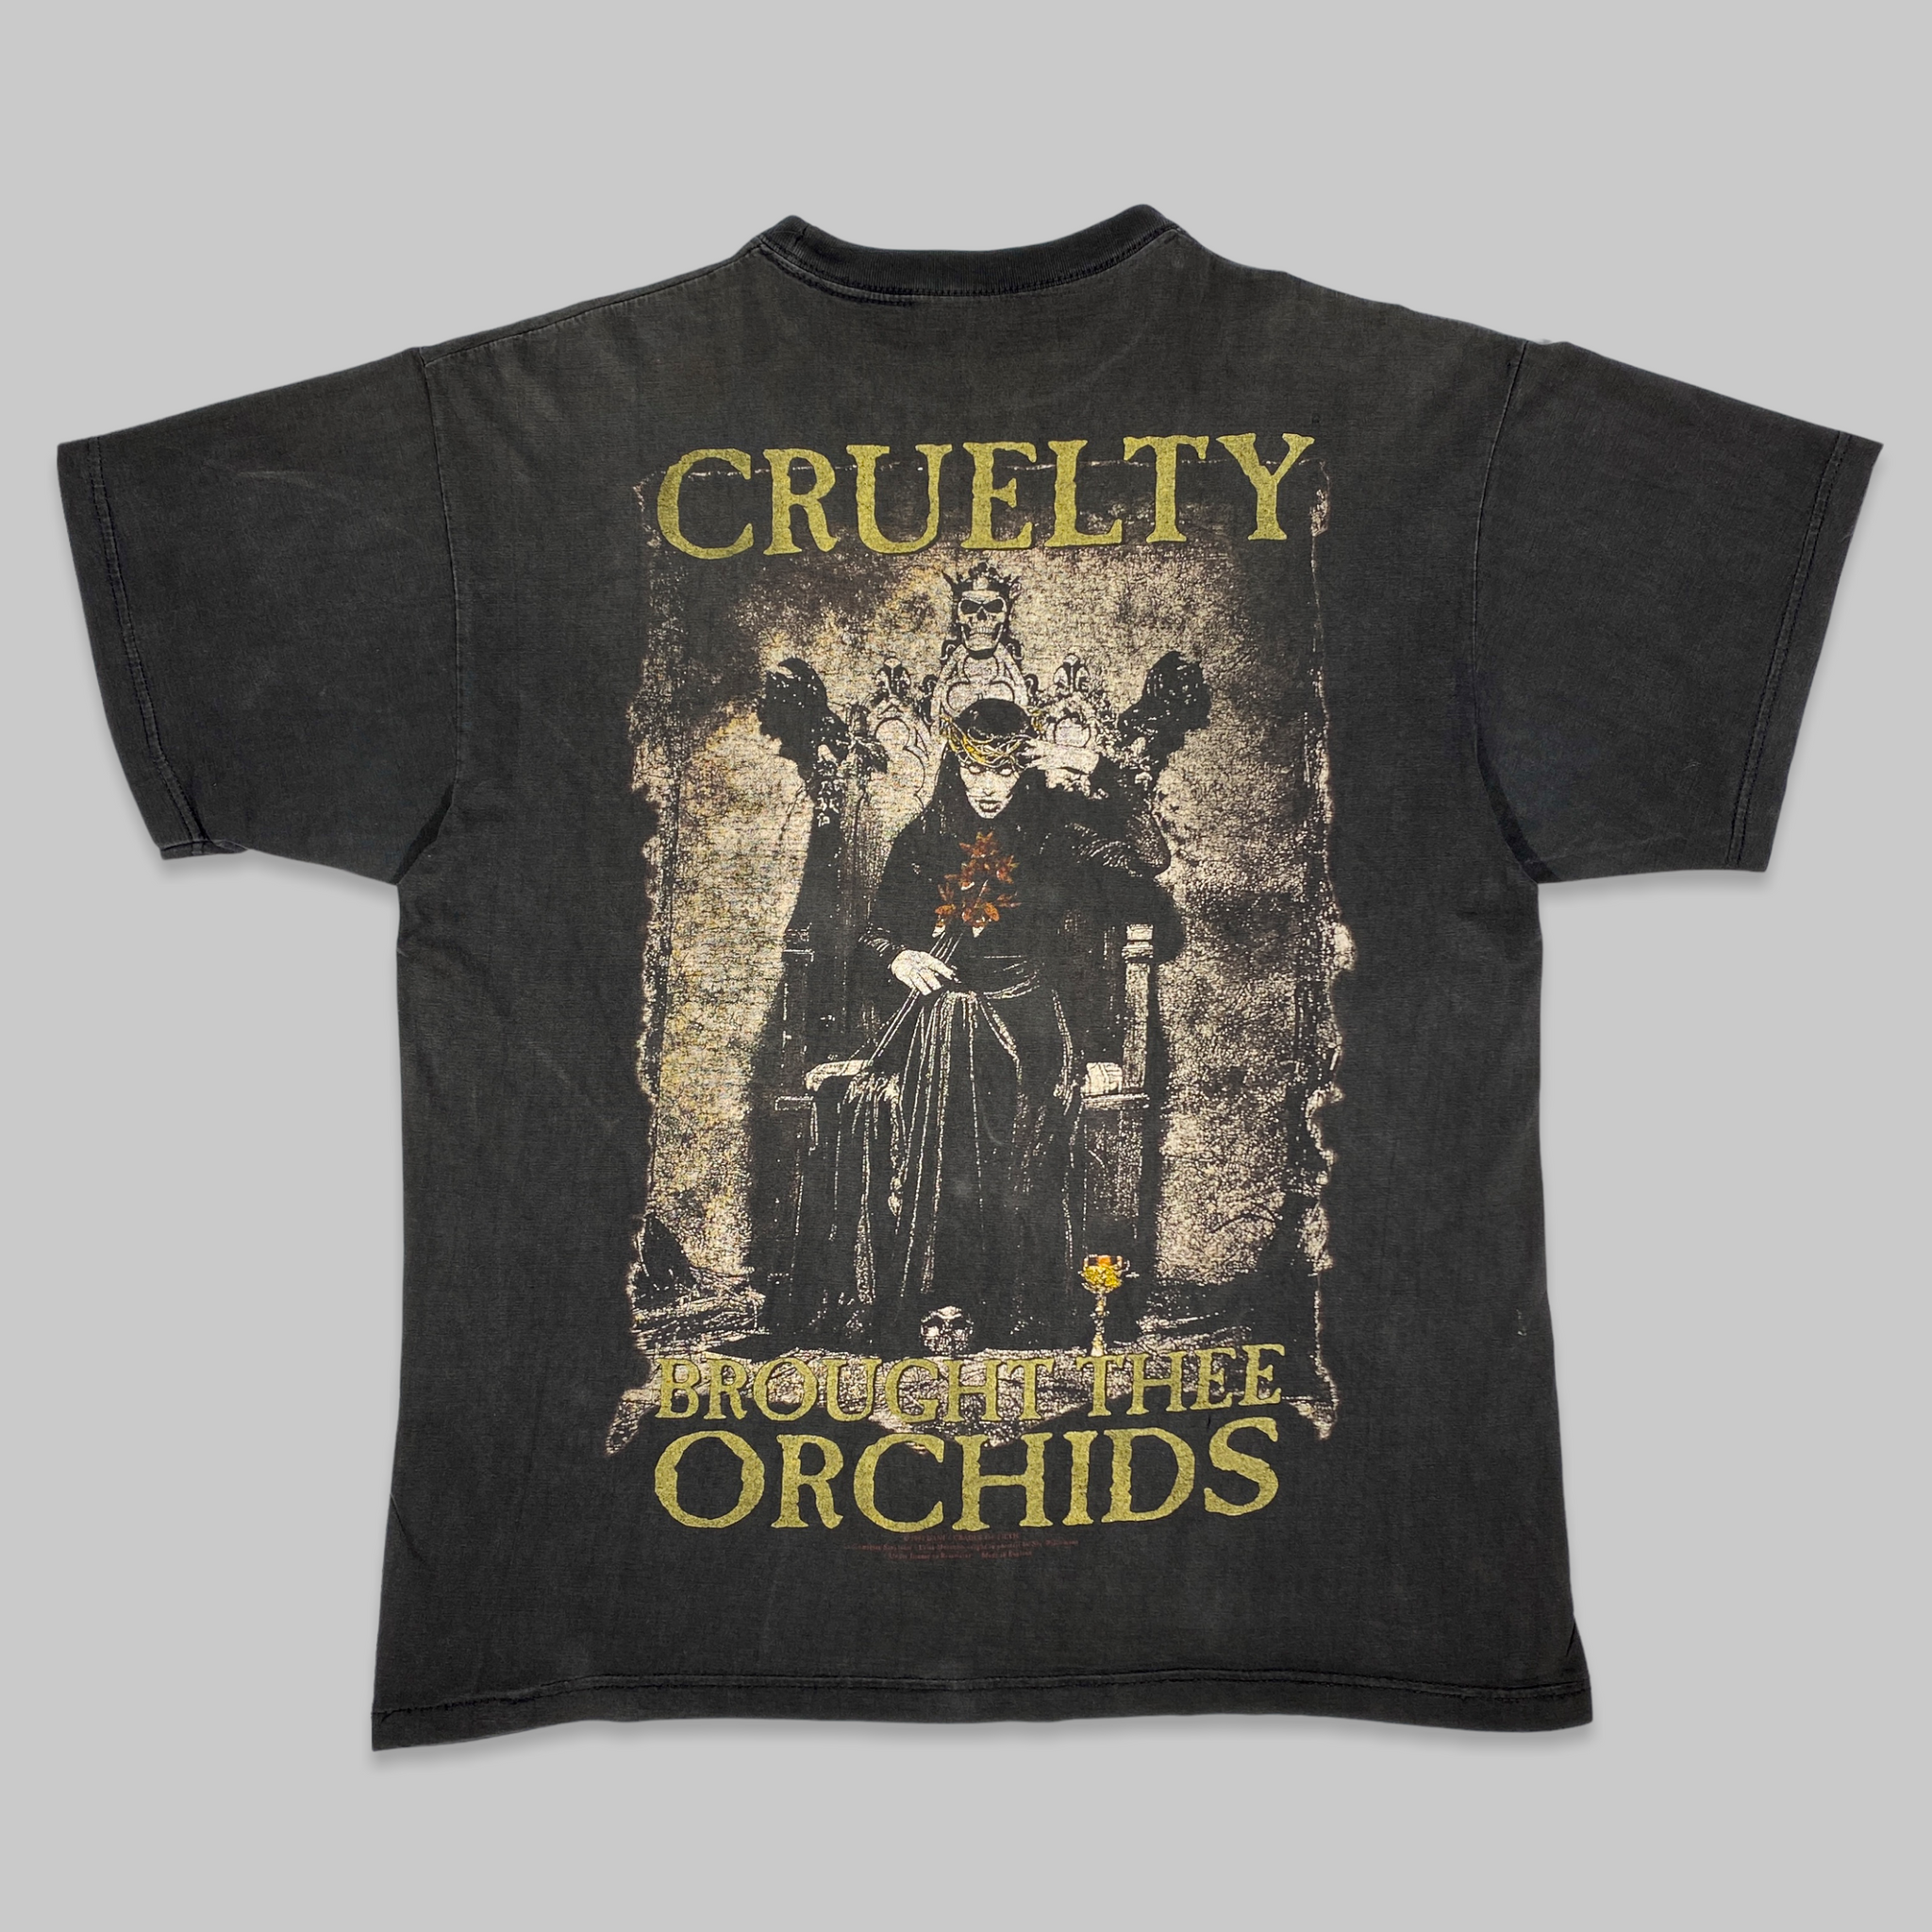 CRADLE OF FILTH | ‘Cruelty and the Beast’ | 1998 | L/XL